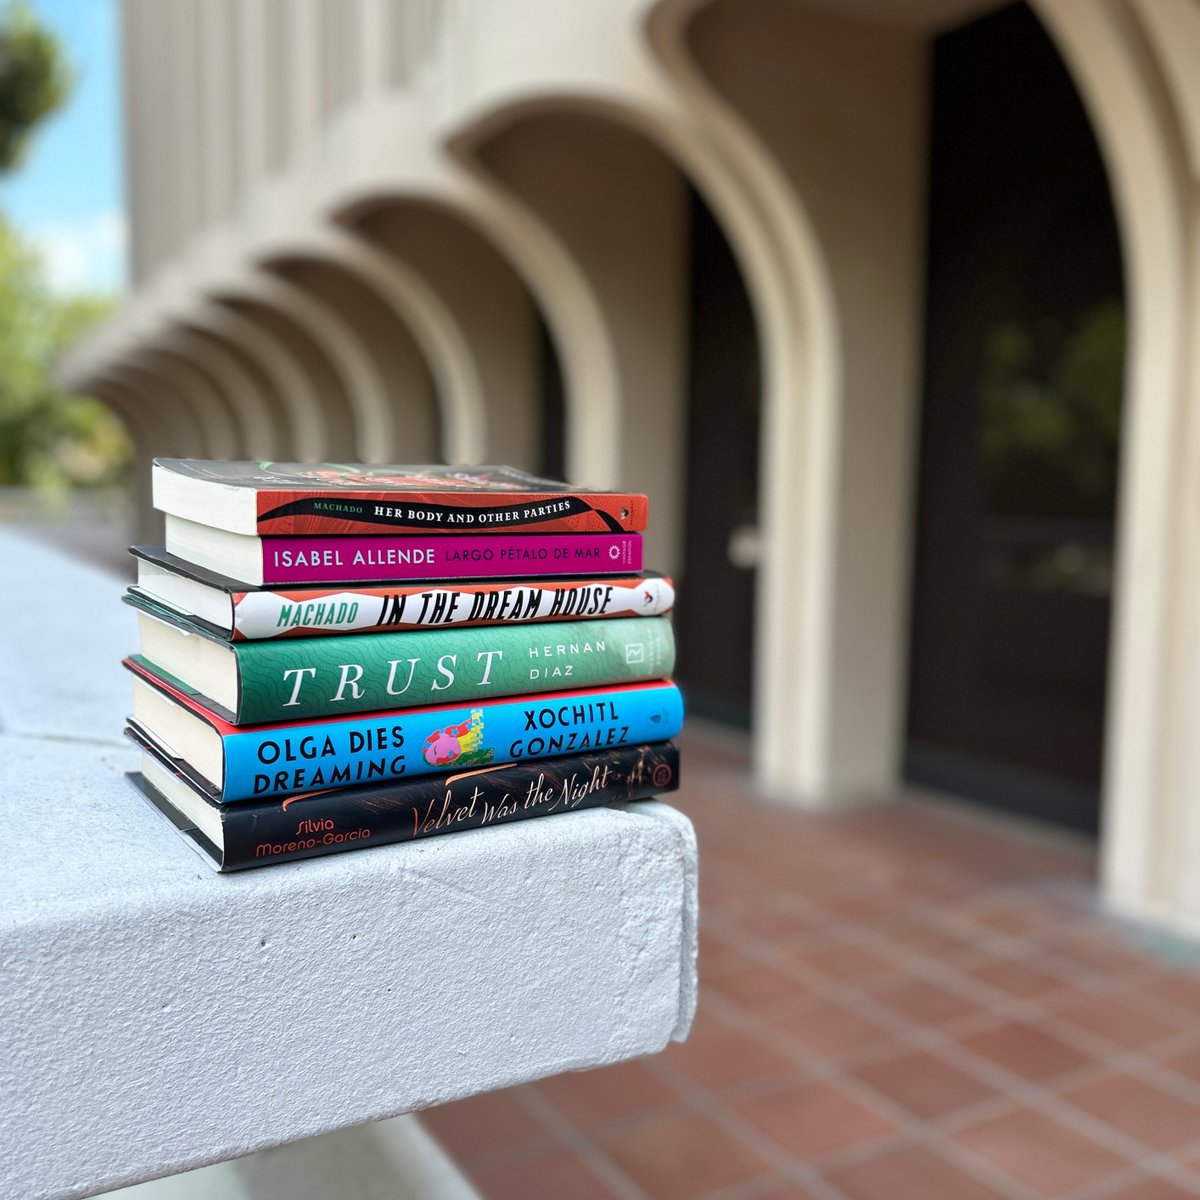 📚✨ #HispanicHeritageMonth concludes this week but it's always a good time to delve into noteworthy books by Latino authors! From powerful memoirs to historical fiction, their stories & voices are vital. #Latinx 🔖 Explore the @ucilibraries list: bit.ly/3PEpEZU